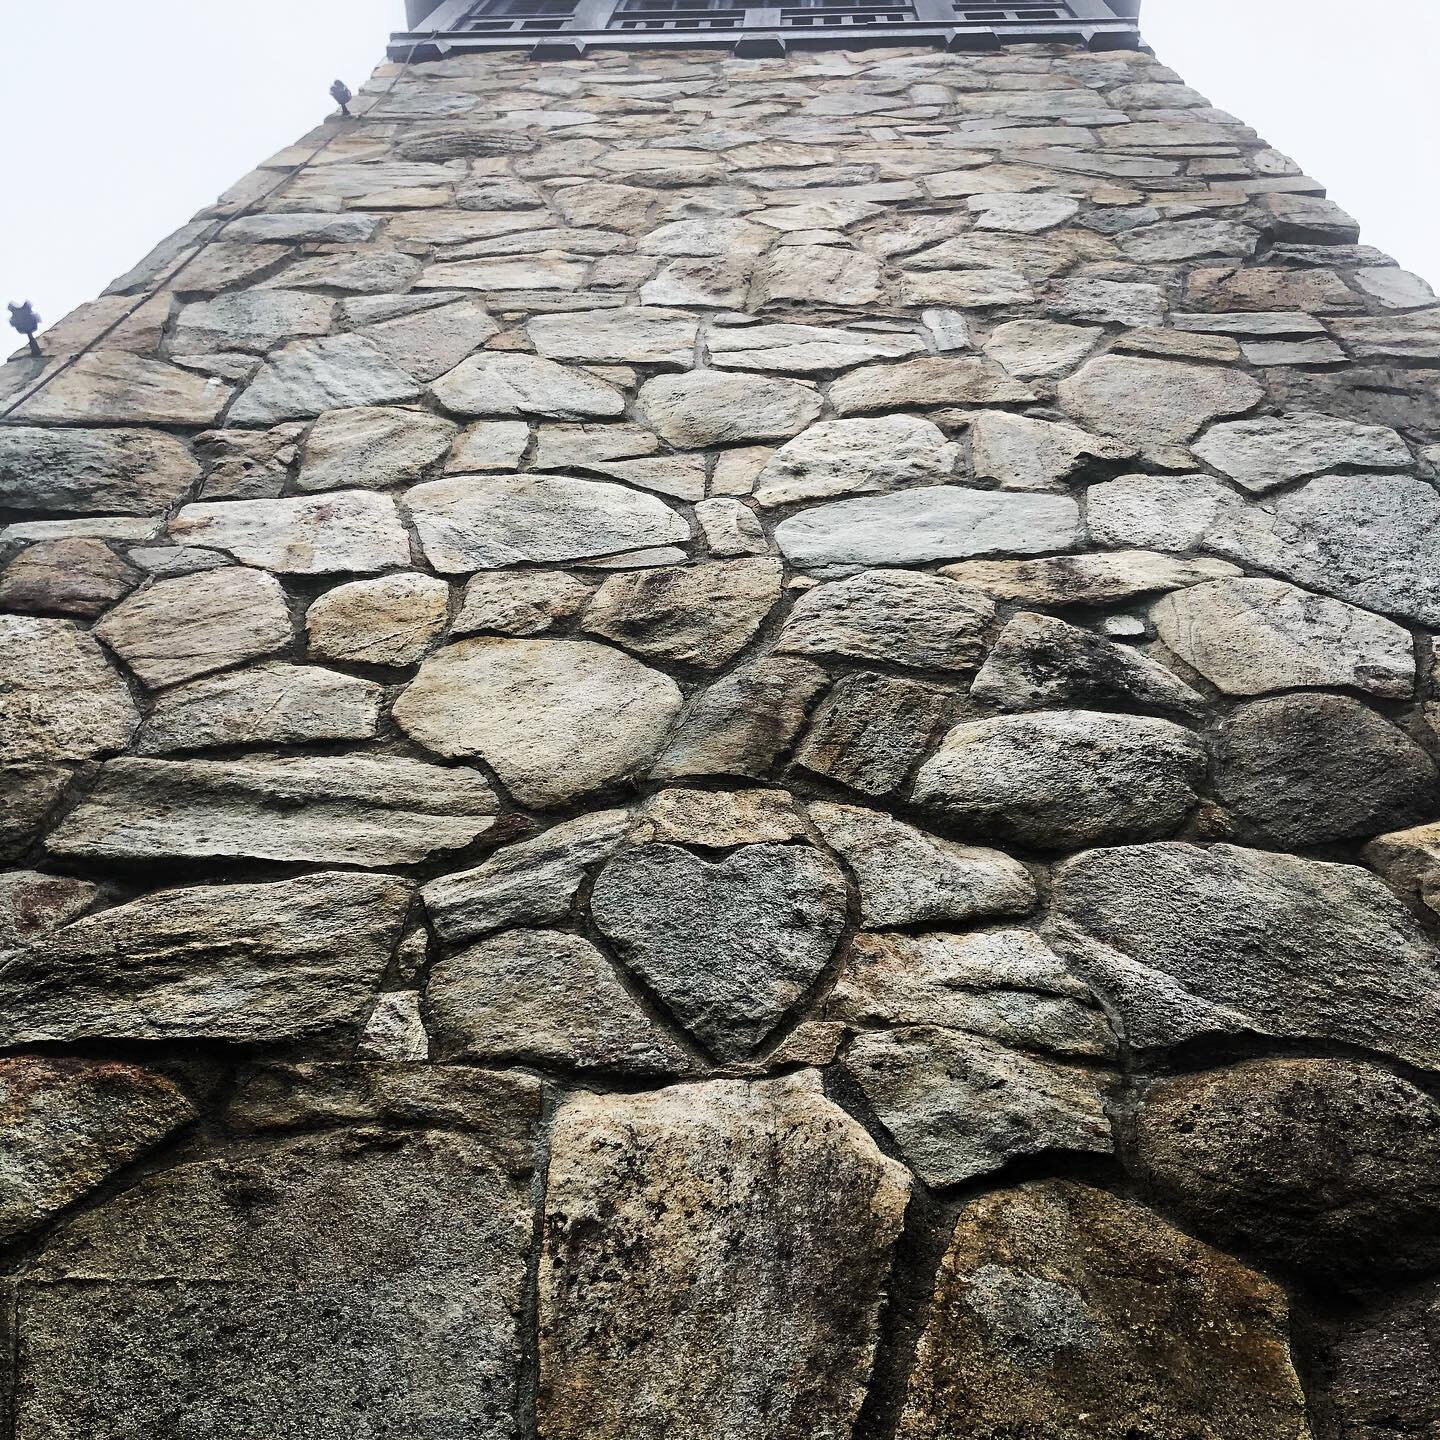 Love is everywhere.

In this case: the heart above the keystone of the fire lookout tower at Fort Mountain.
#lookup #fortmountain #🪨 #optoutside #ccc #civilianconservationcorps